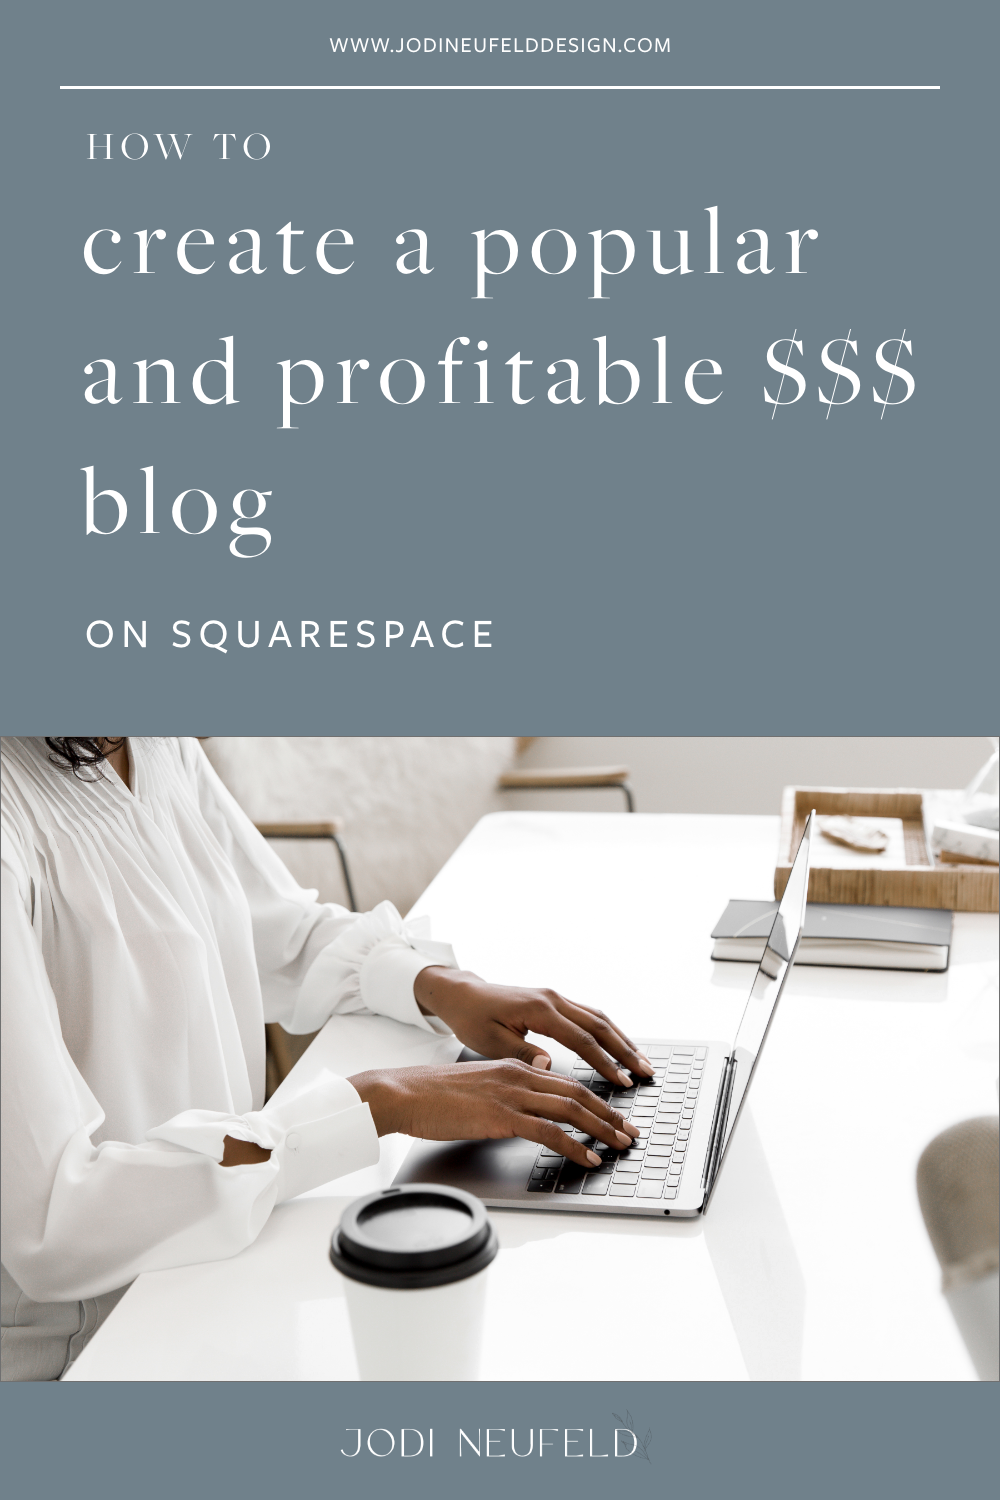 How to create a profitable blog on Squarespace | pin graphic 5 | Jodi Neufeld Design.png